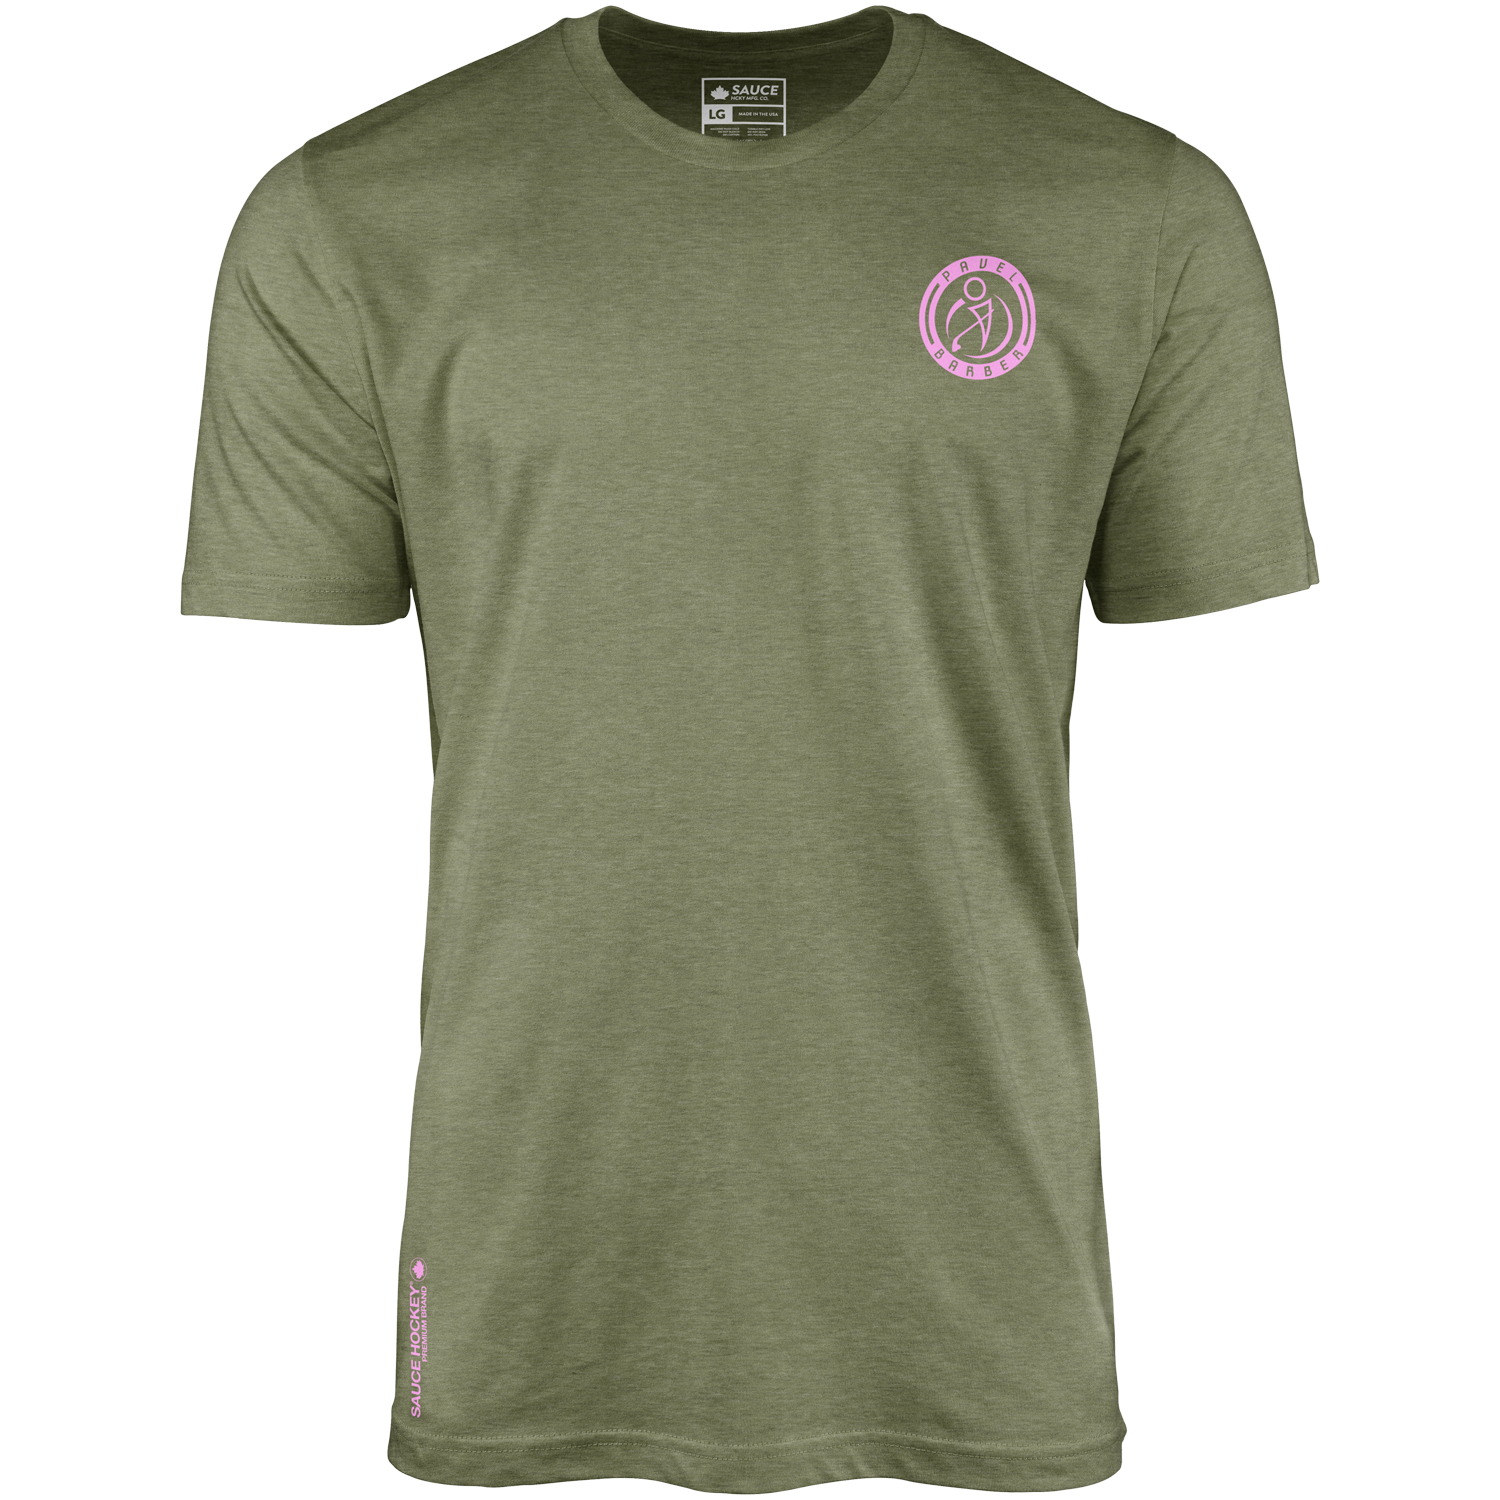 ICONIC PAVEL BARBER (MILITARY GREEN)